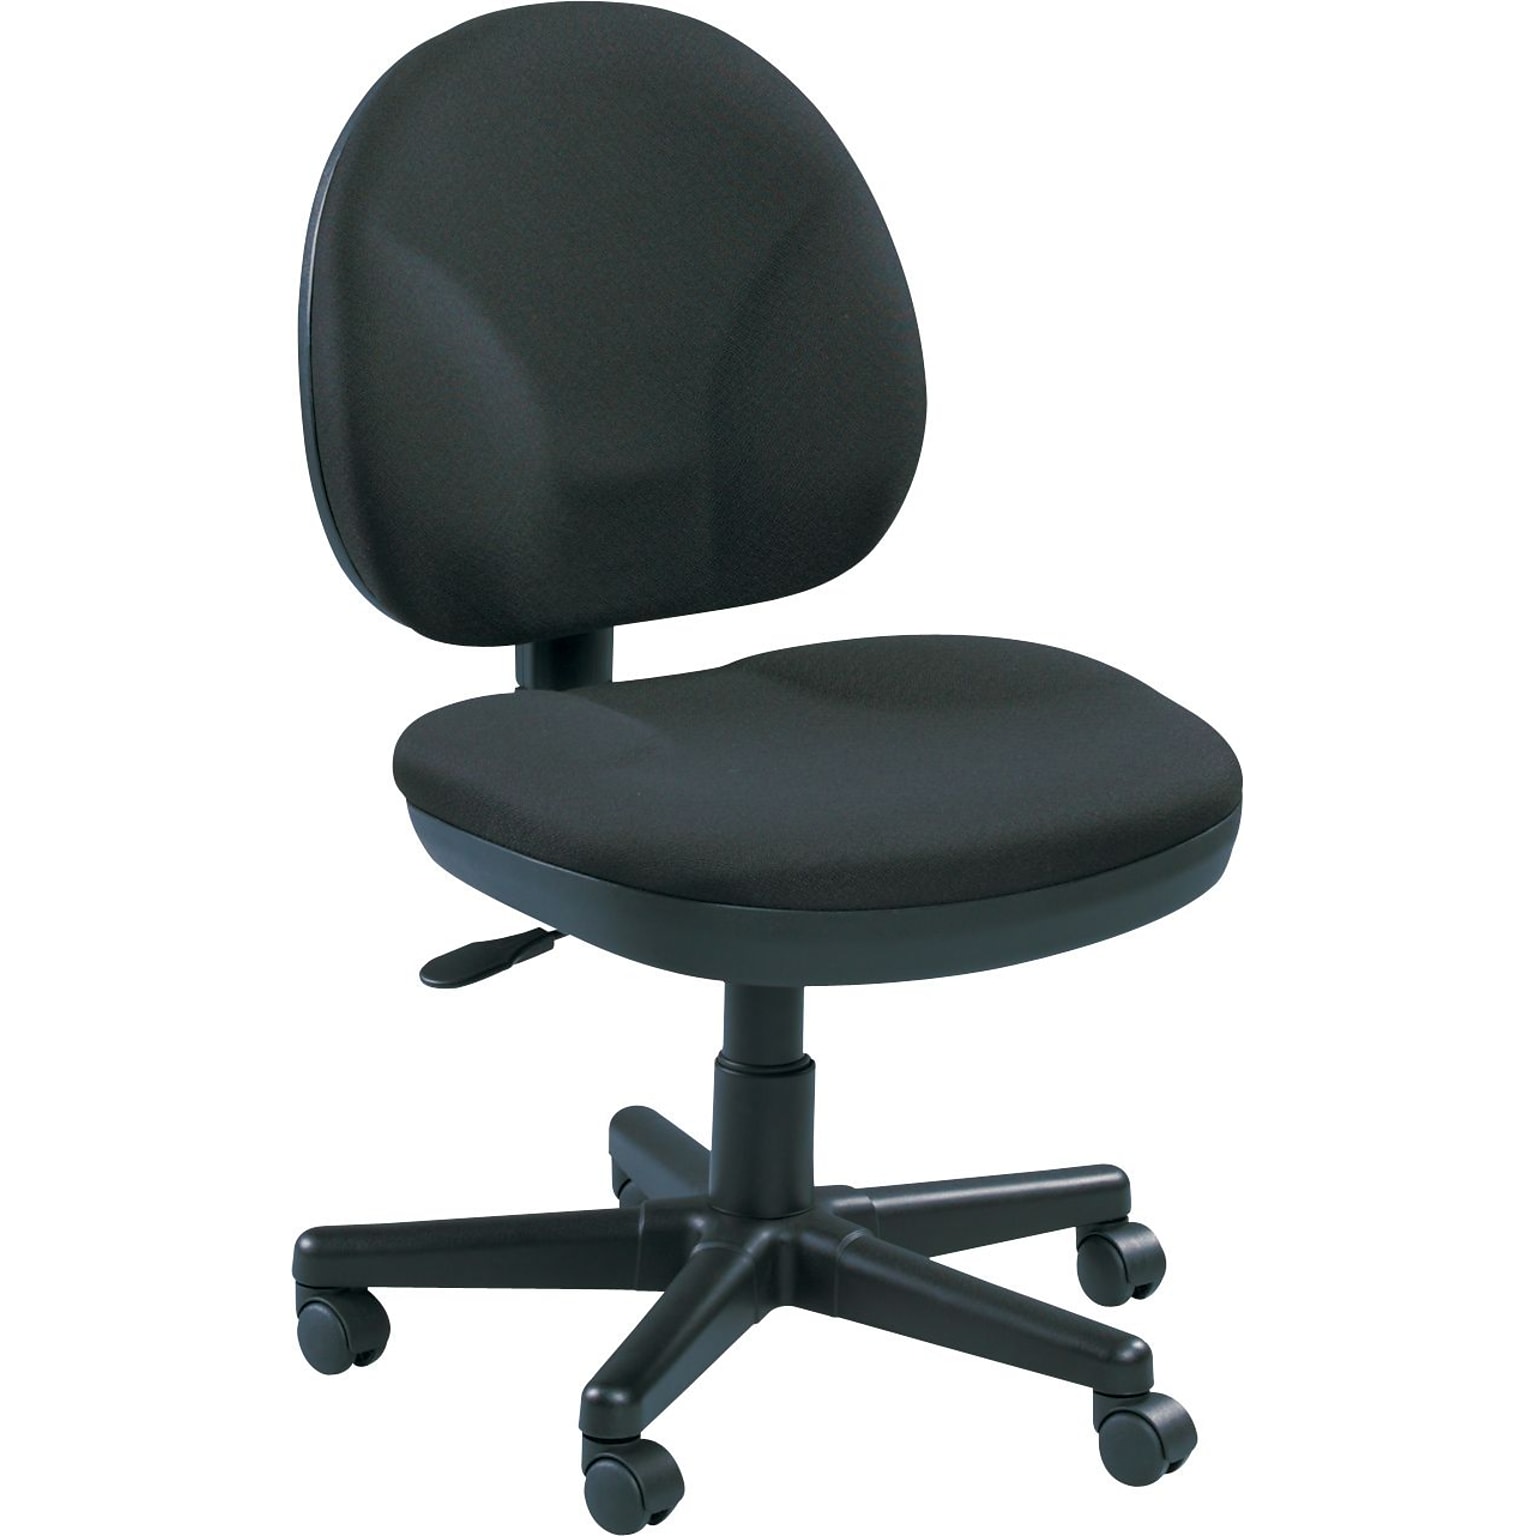 Raynor Eurotech Fabric OSS Swivel Chair, Pewter